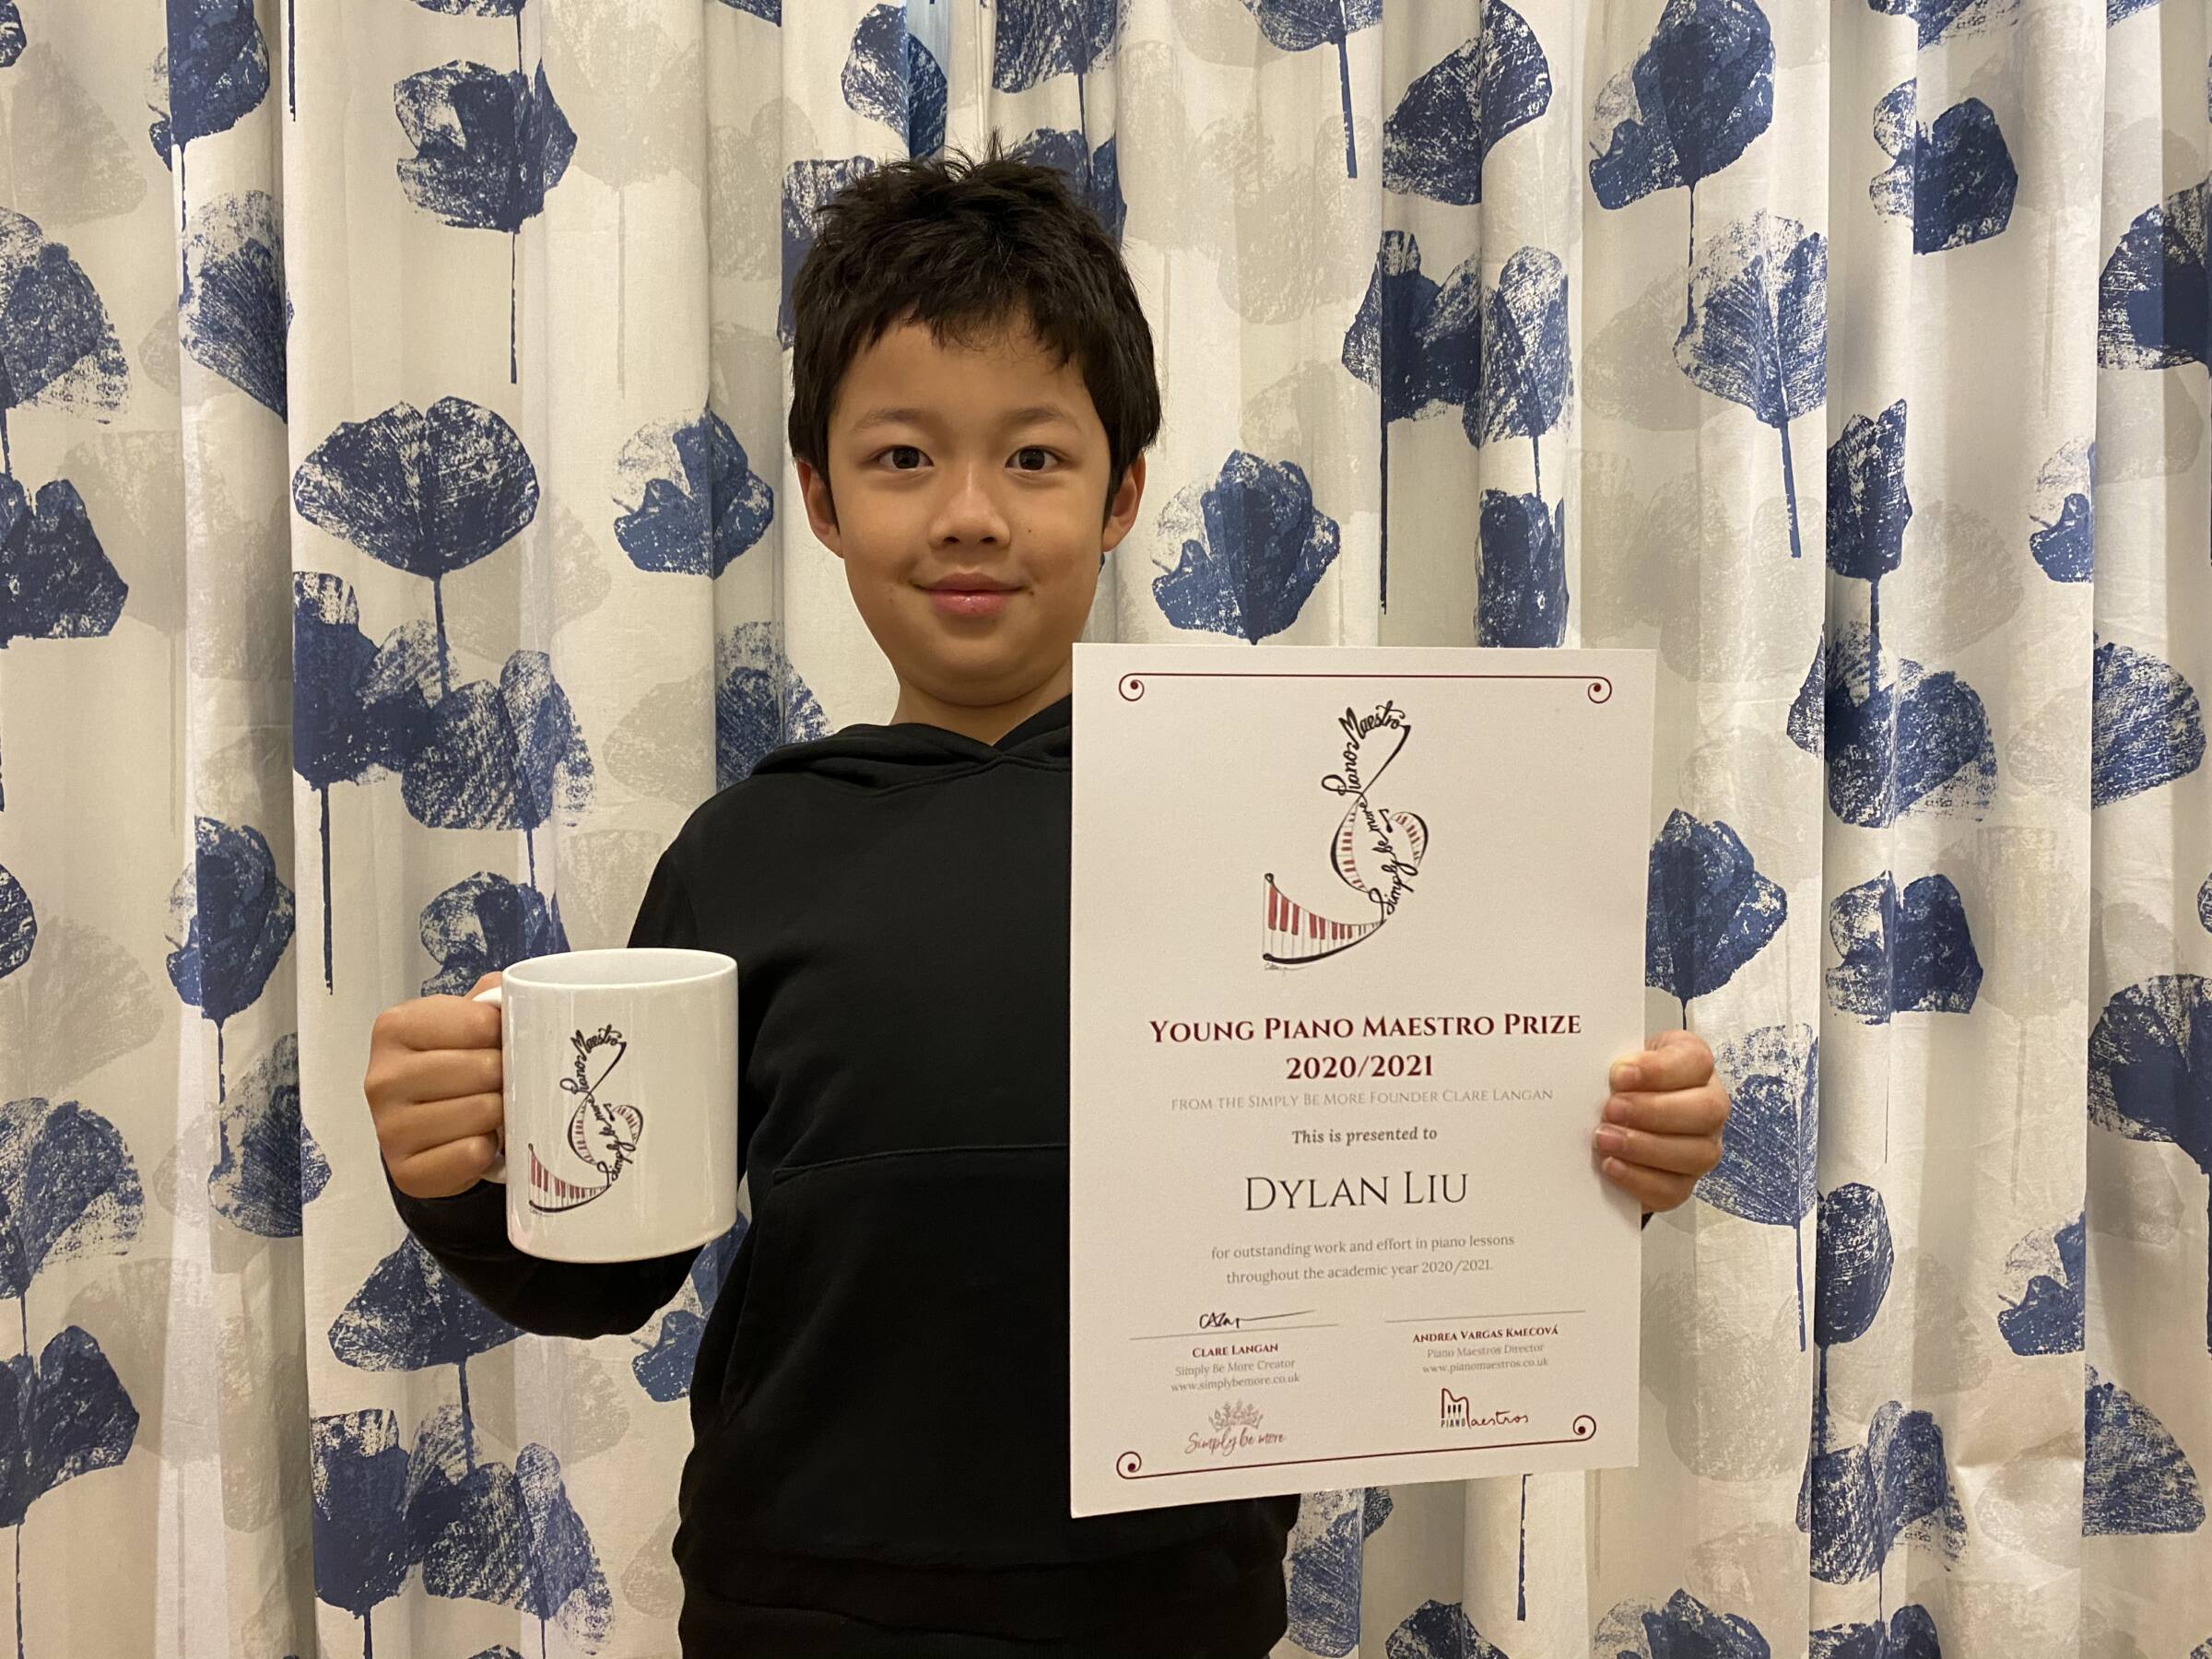 Every year will give the Young Piano Maestro Award to the student who has shown the most effort throughout the academic year.